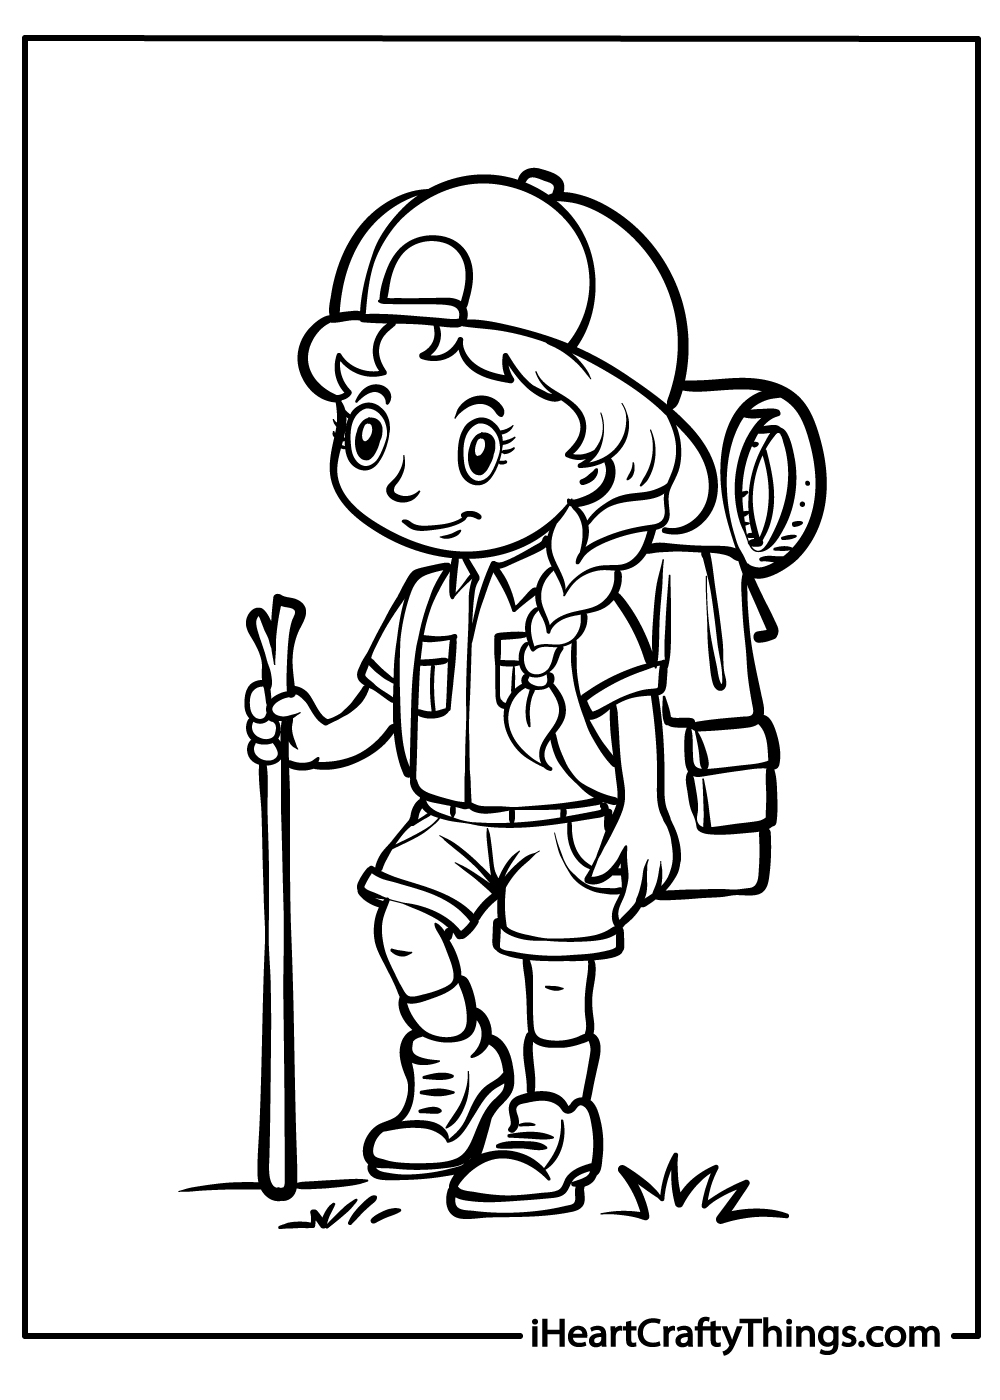 Camping Coloring Pages for Kids